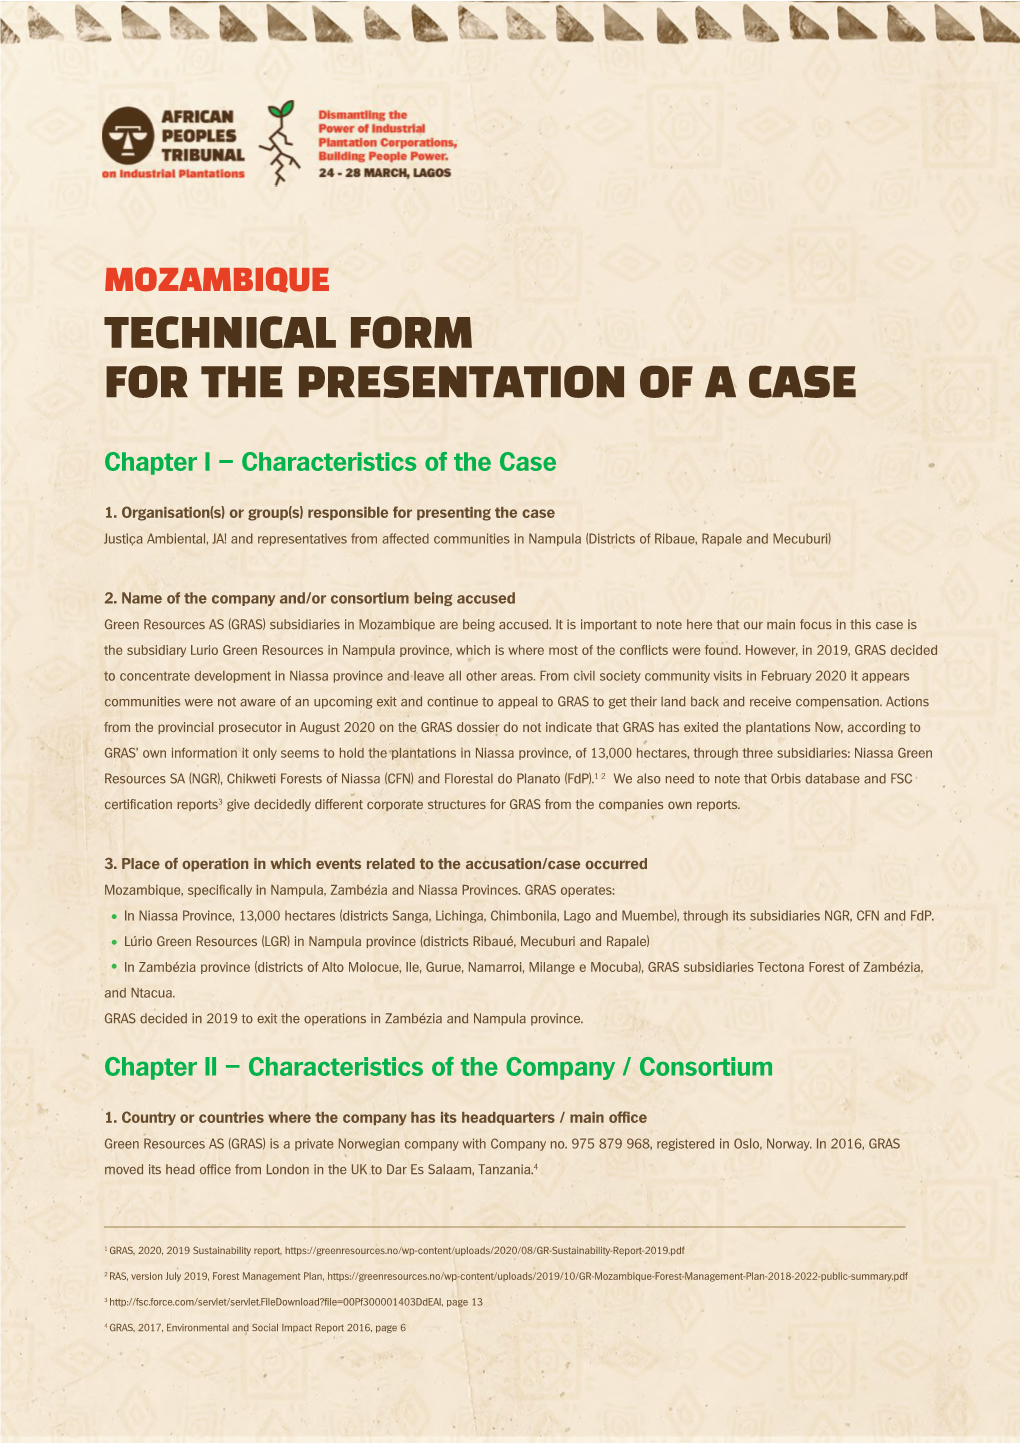 Technical Form for the Presentation of a Case